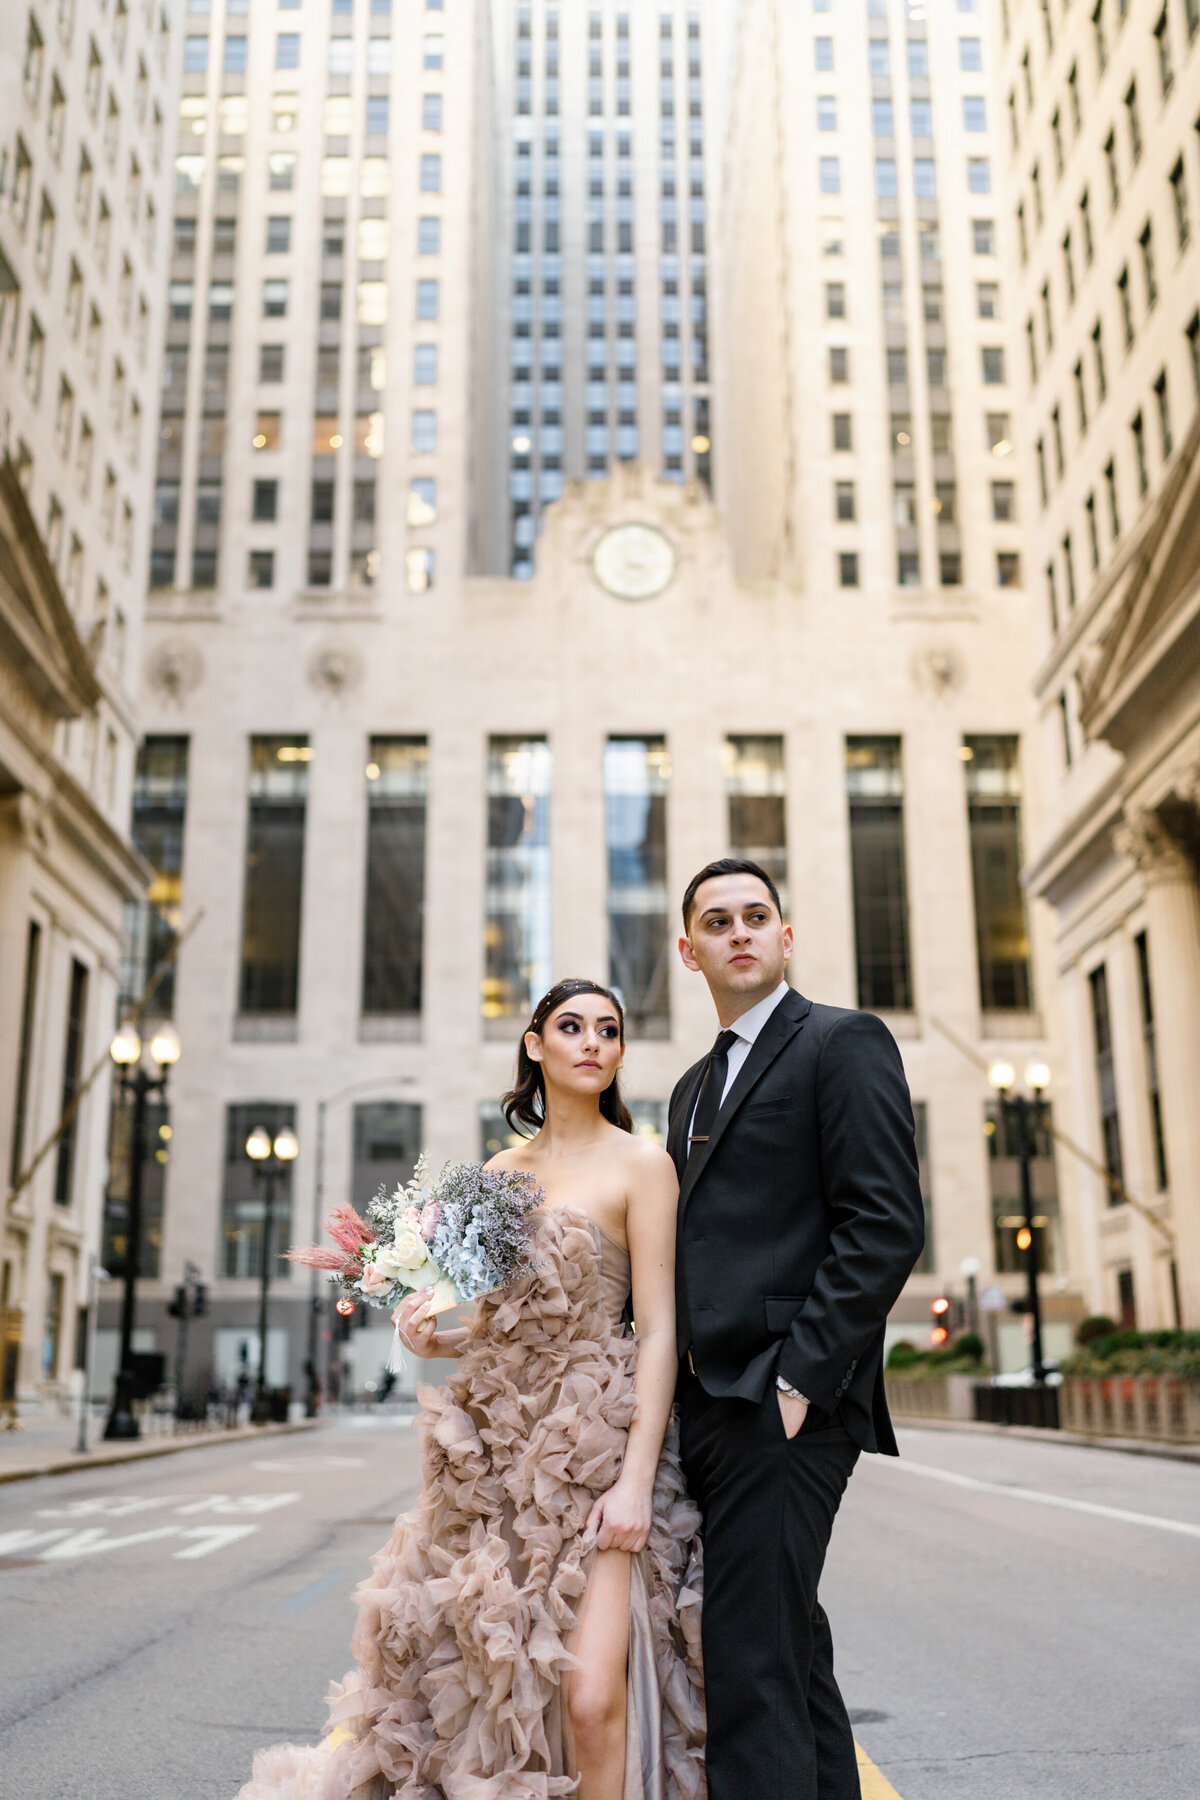 Aspen-Avenue-Chicago-Wedding-Photographer-Rookery-Engagement-Session-Histoircal-Stairs-Moody-Dramatic-Magazine-Unique-Gown-Stemming-From-Love-Emily-Rae-Bridal-Hair-FAV-63